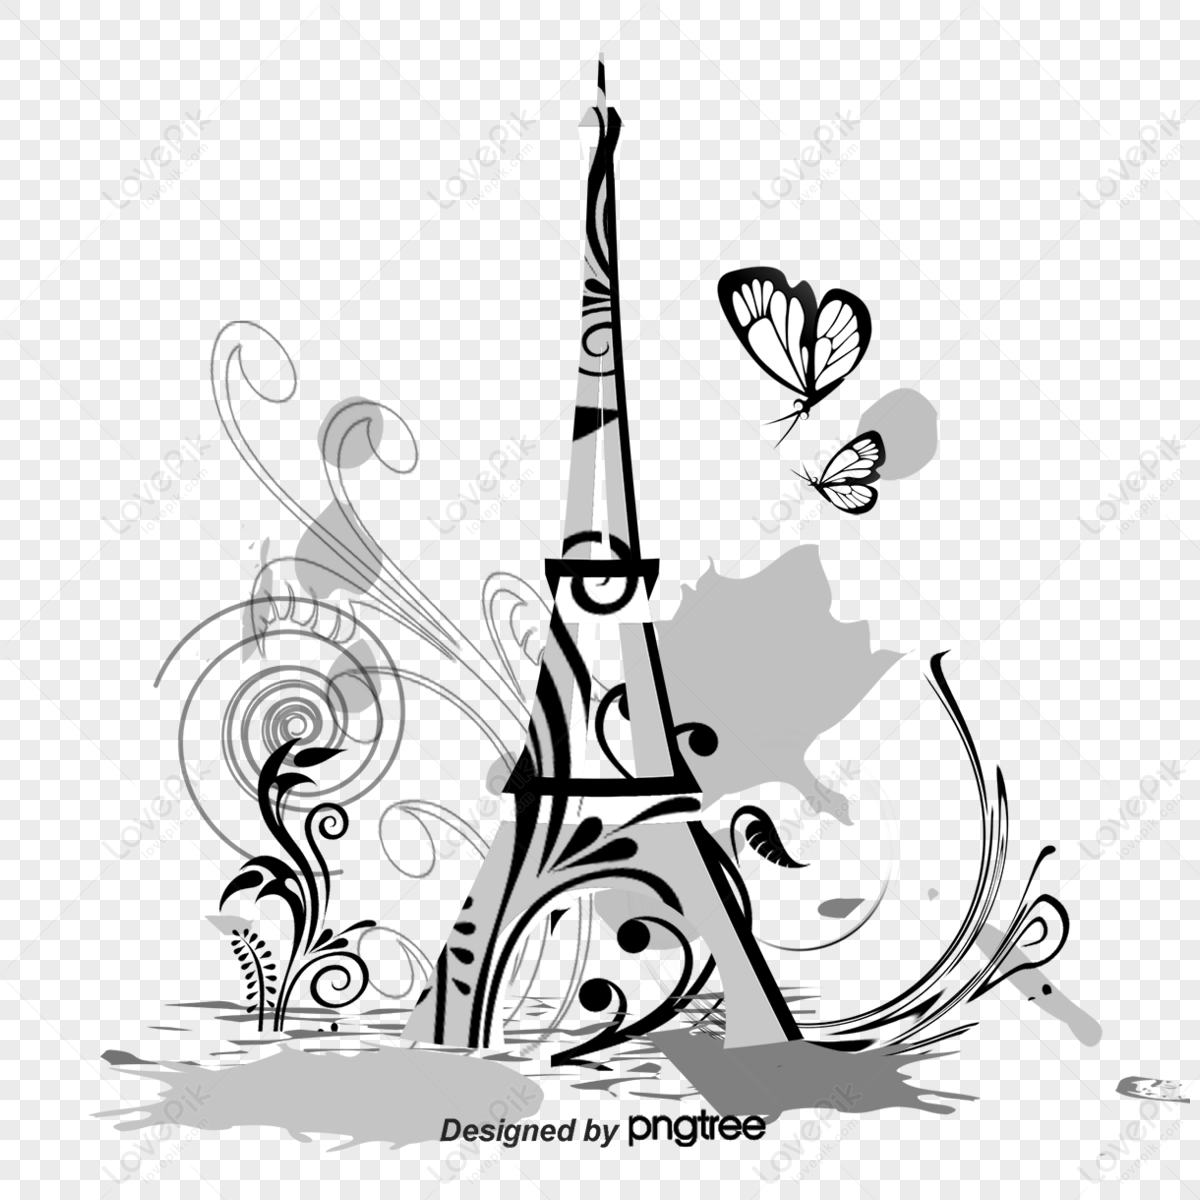 eiffel tower,tower sketch,paris,tower drawing png white transparent